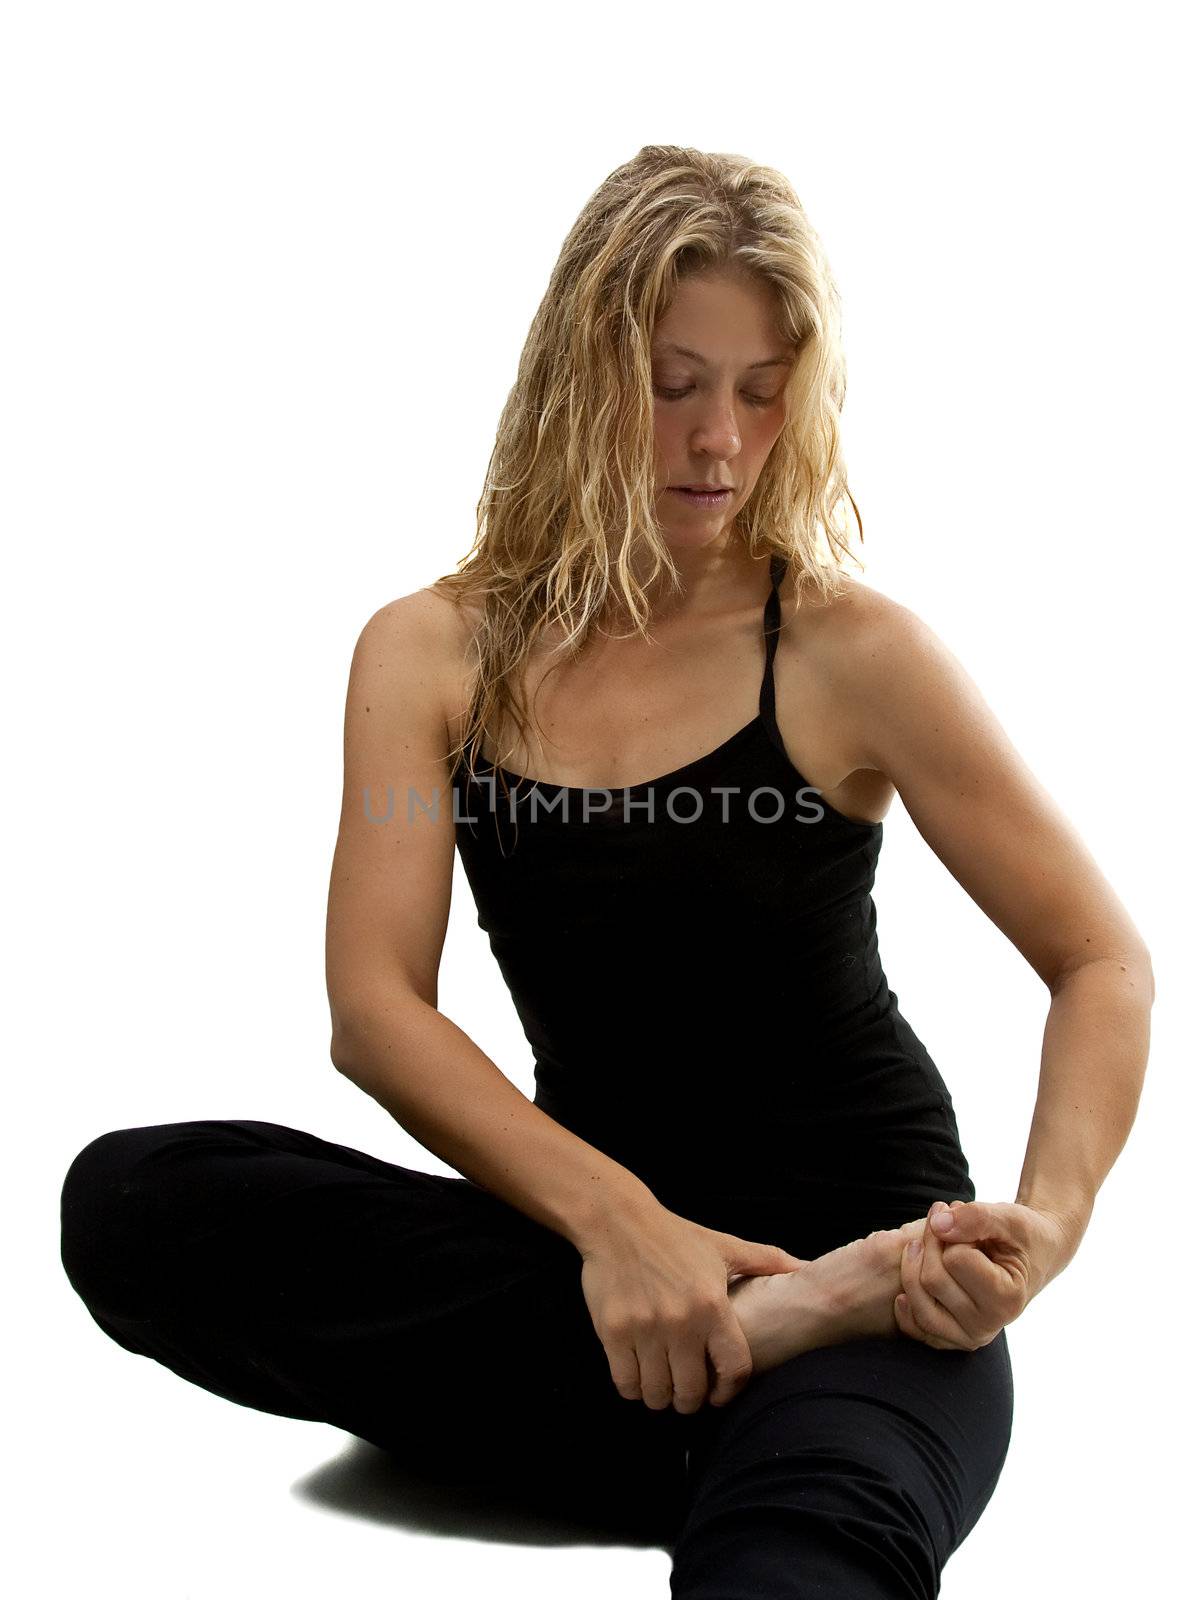 Blond woman streches, preparing for Yoga exercise by totony